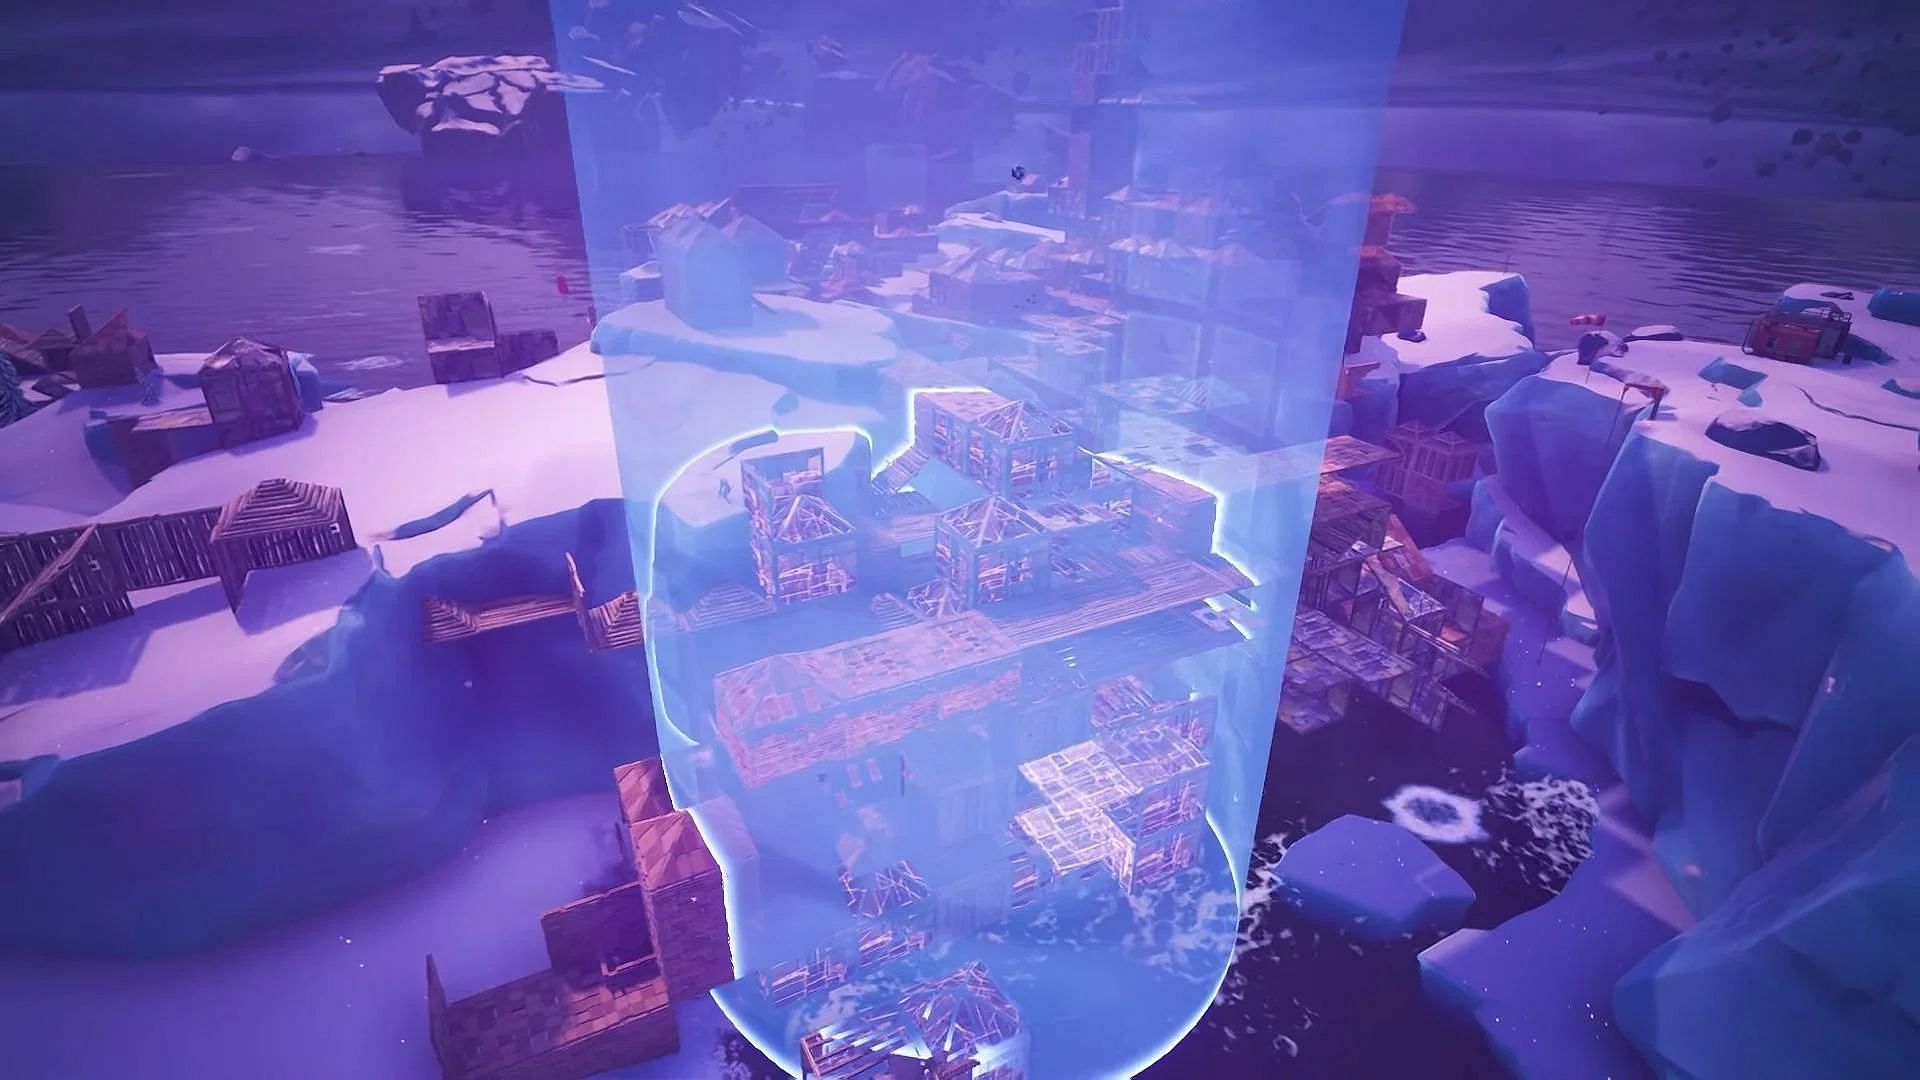 Fortnite Storm glitch is allowing players to camp indefinitely